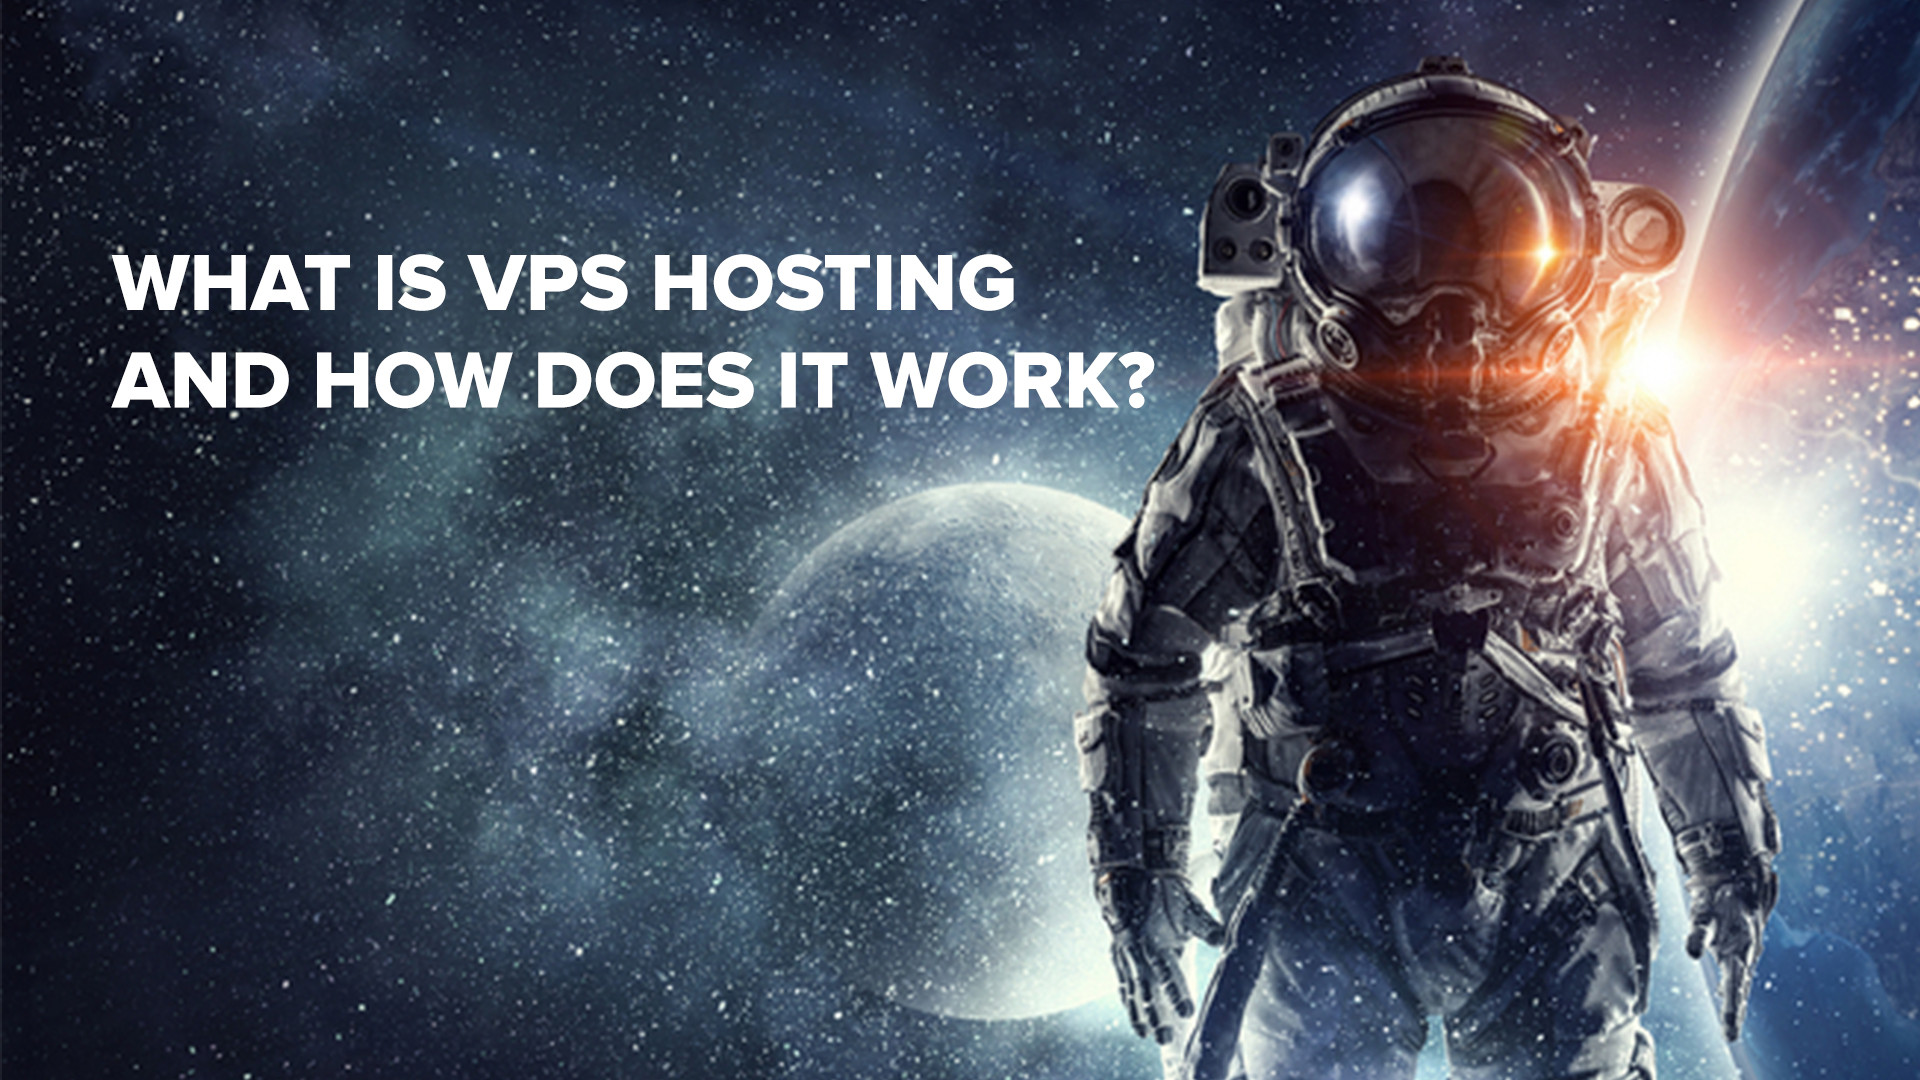 What is VPS hosting and how does it work